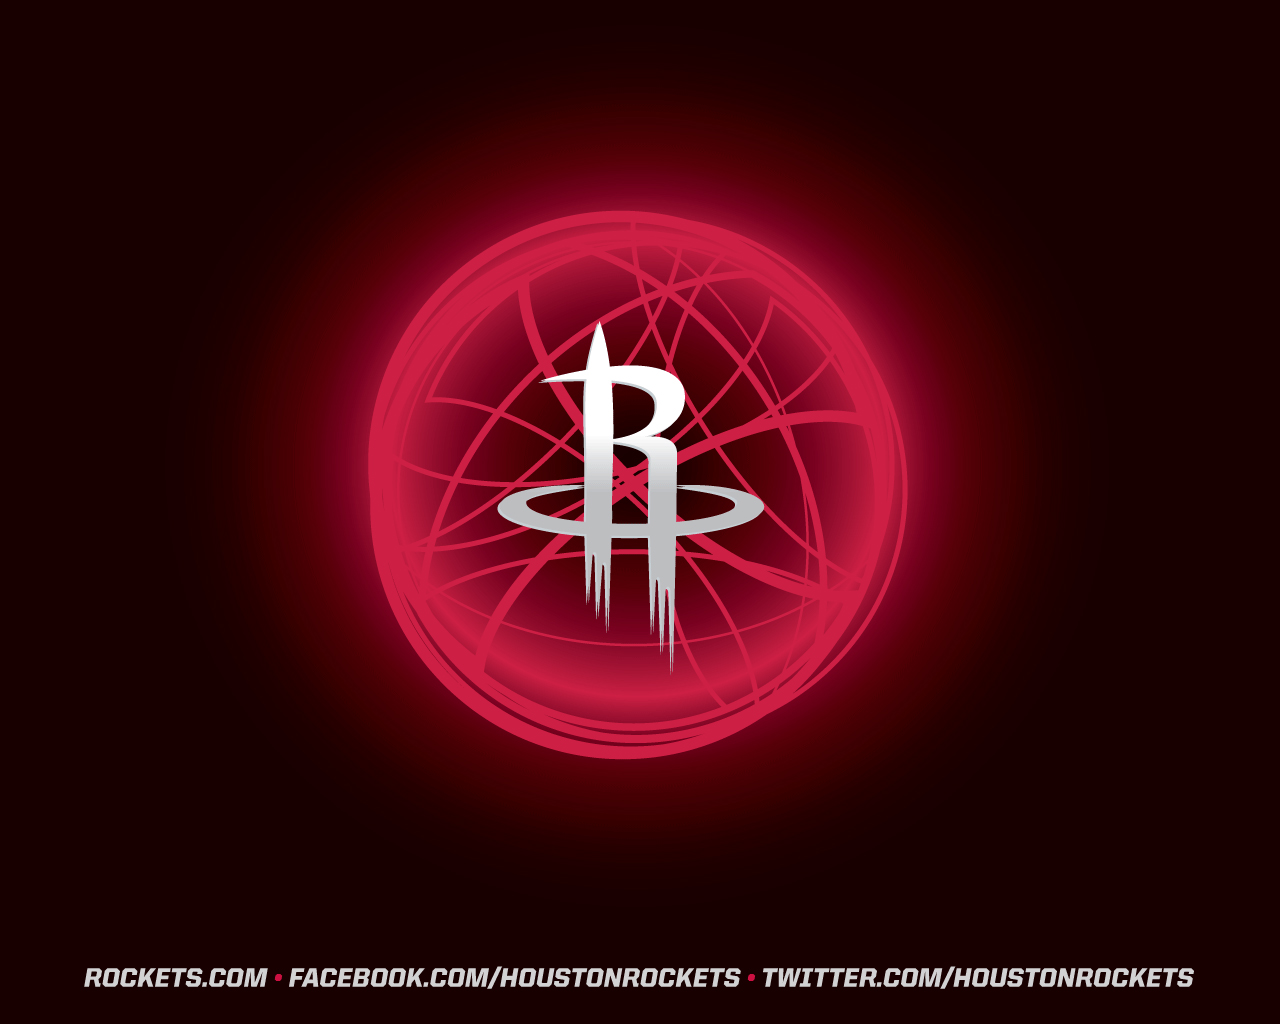 Rockets Wallpaper   NBA NEW THE OFFICIAL SITE OF THE HOUSTON ROCKETS